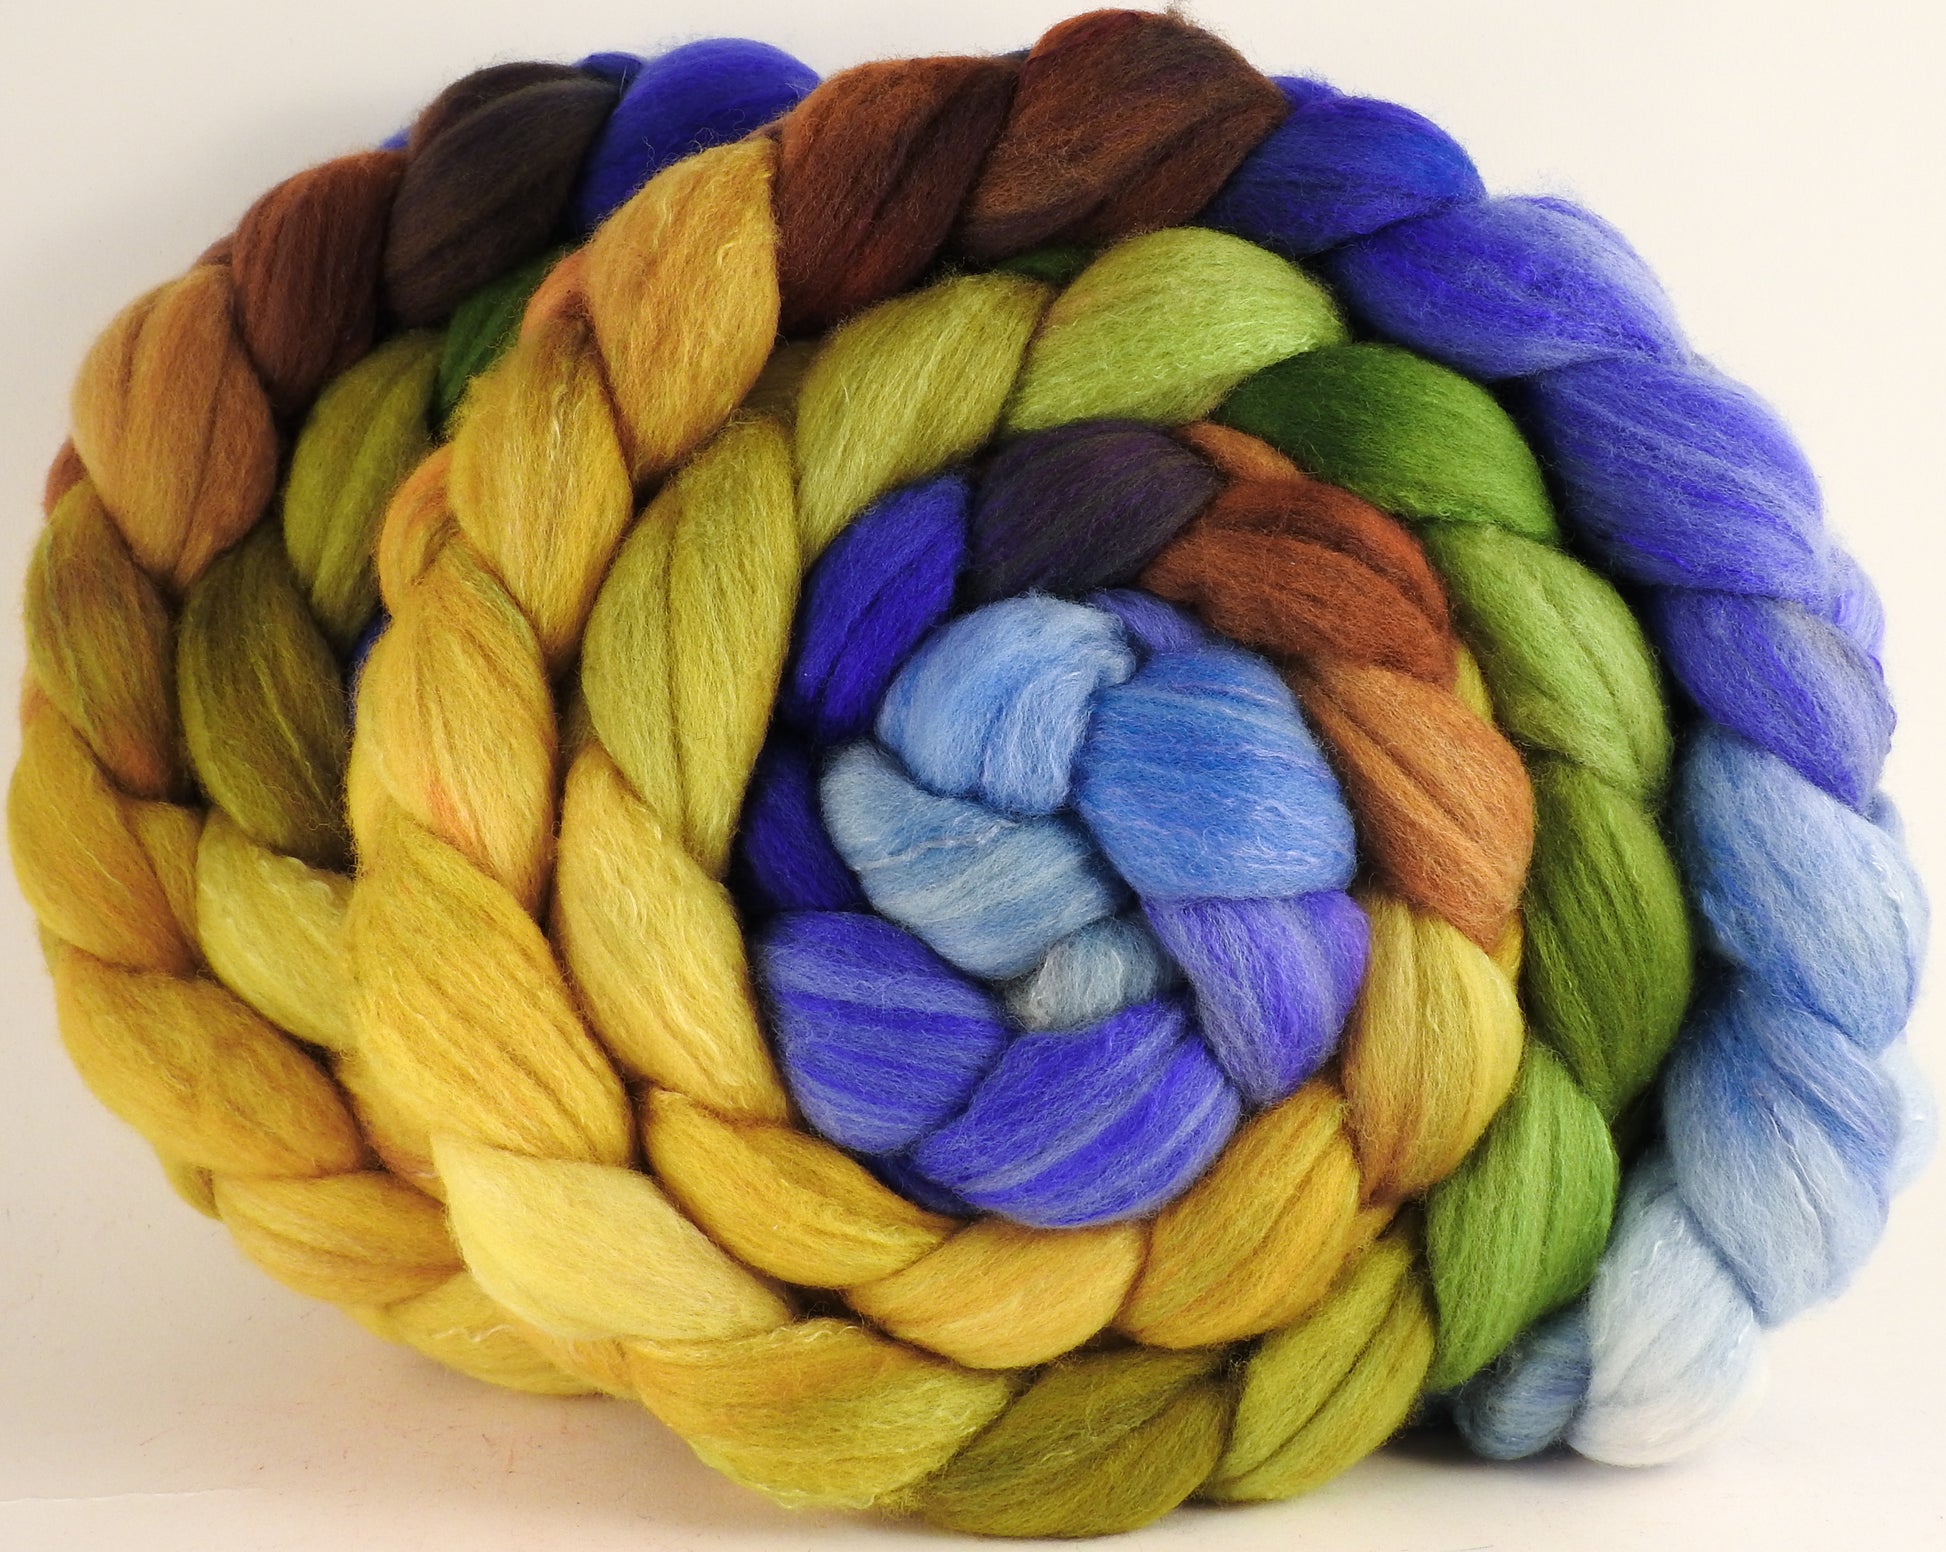 RESERVED FOR ARCTICSPINNER - Hand dyed top for spinning - (11.6 oz) Organic Polwarth / Tussah silk (80/20) - Inglenook Fibers